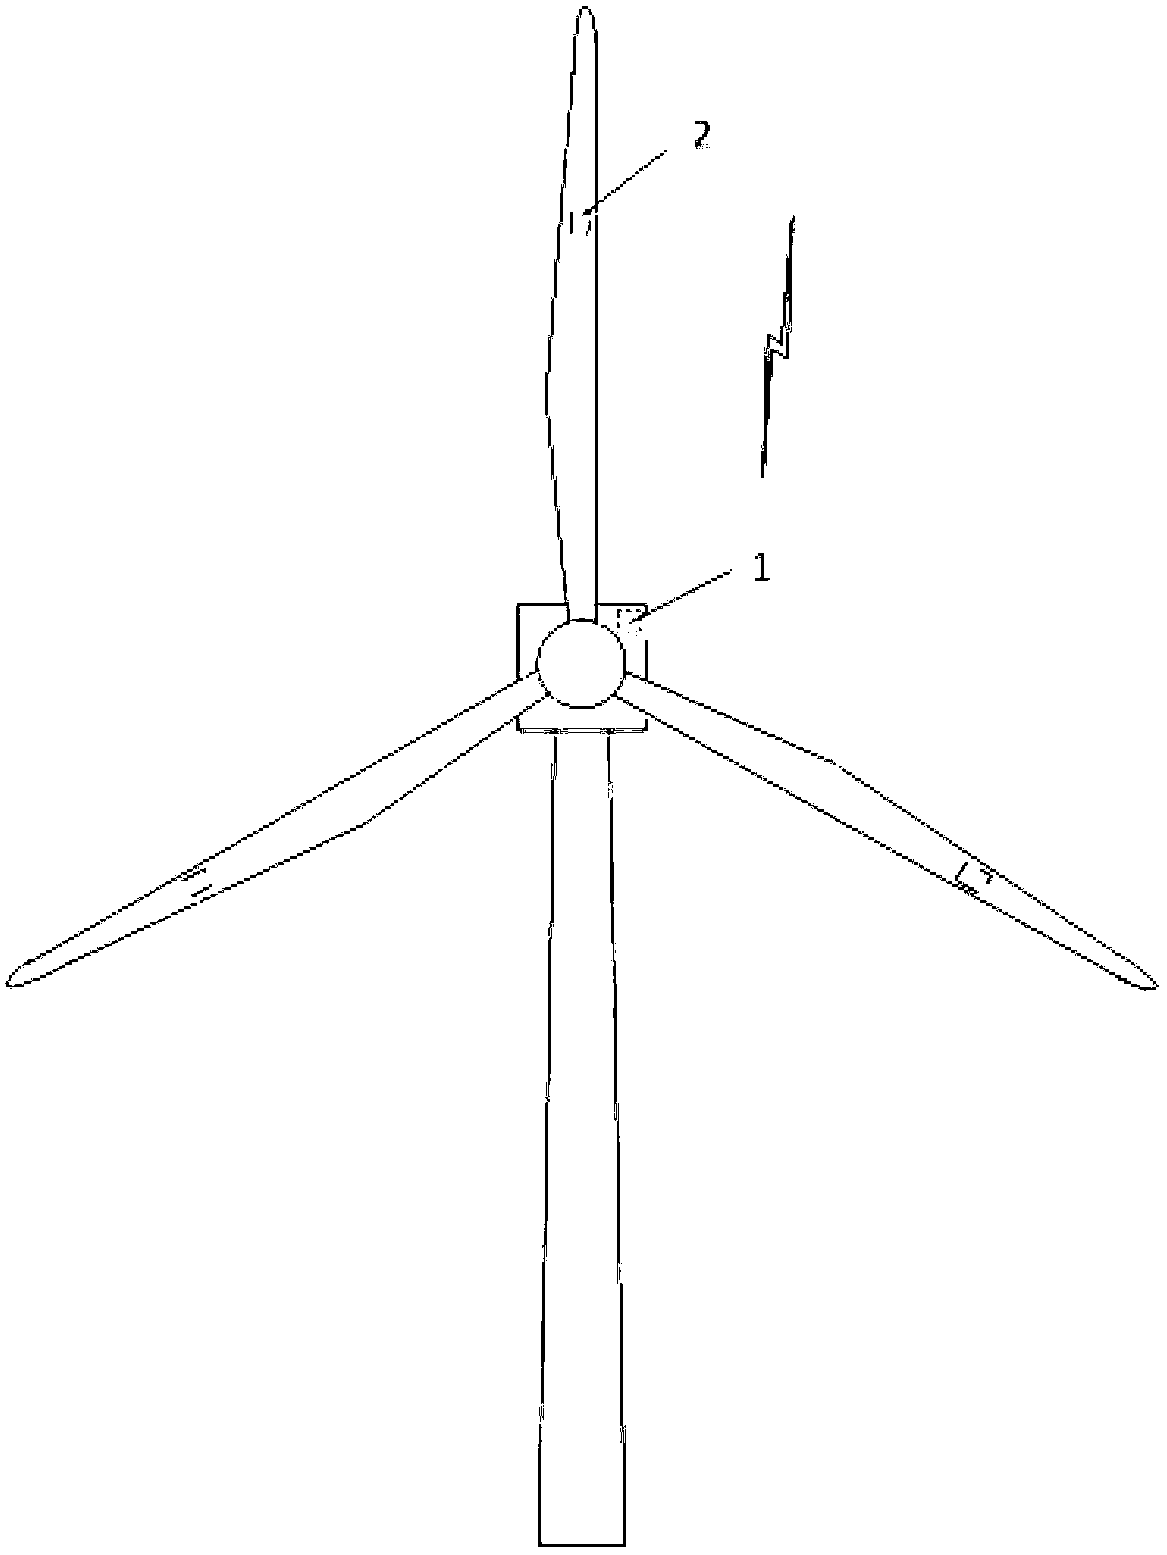 Wind power blade wireless vibration monitoring device and method on basis of kinetic energy battery